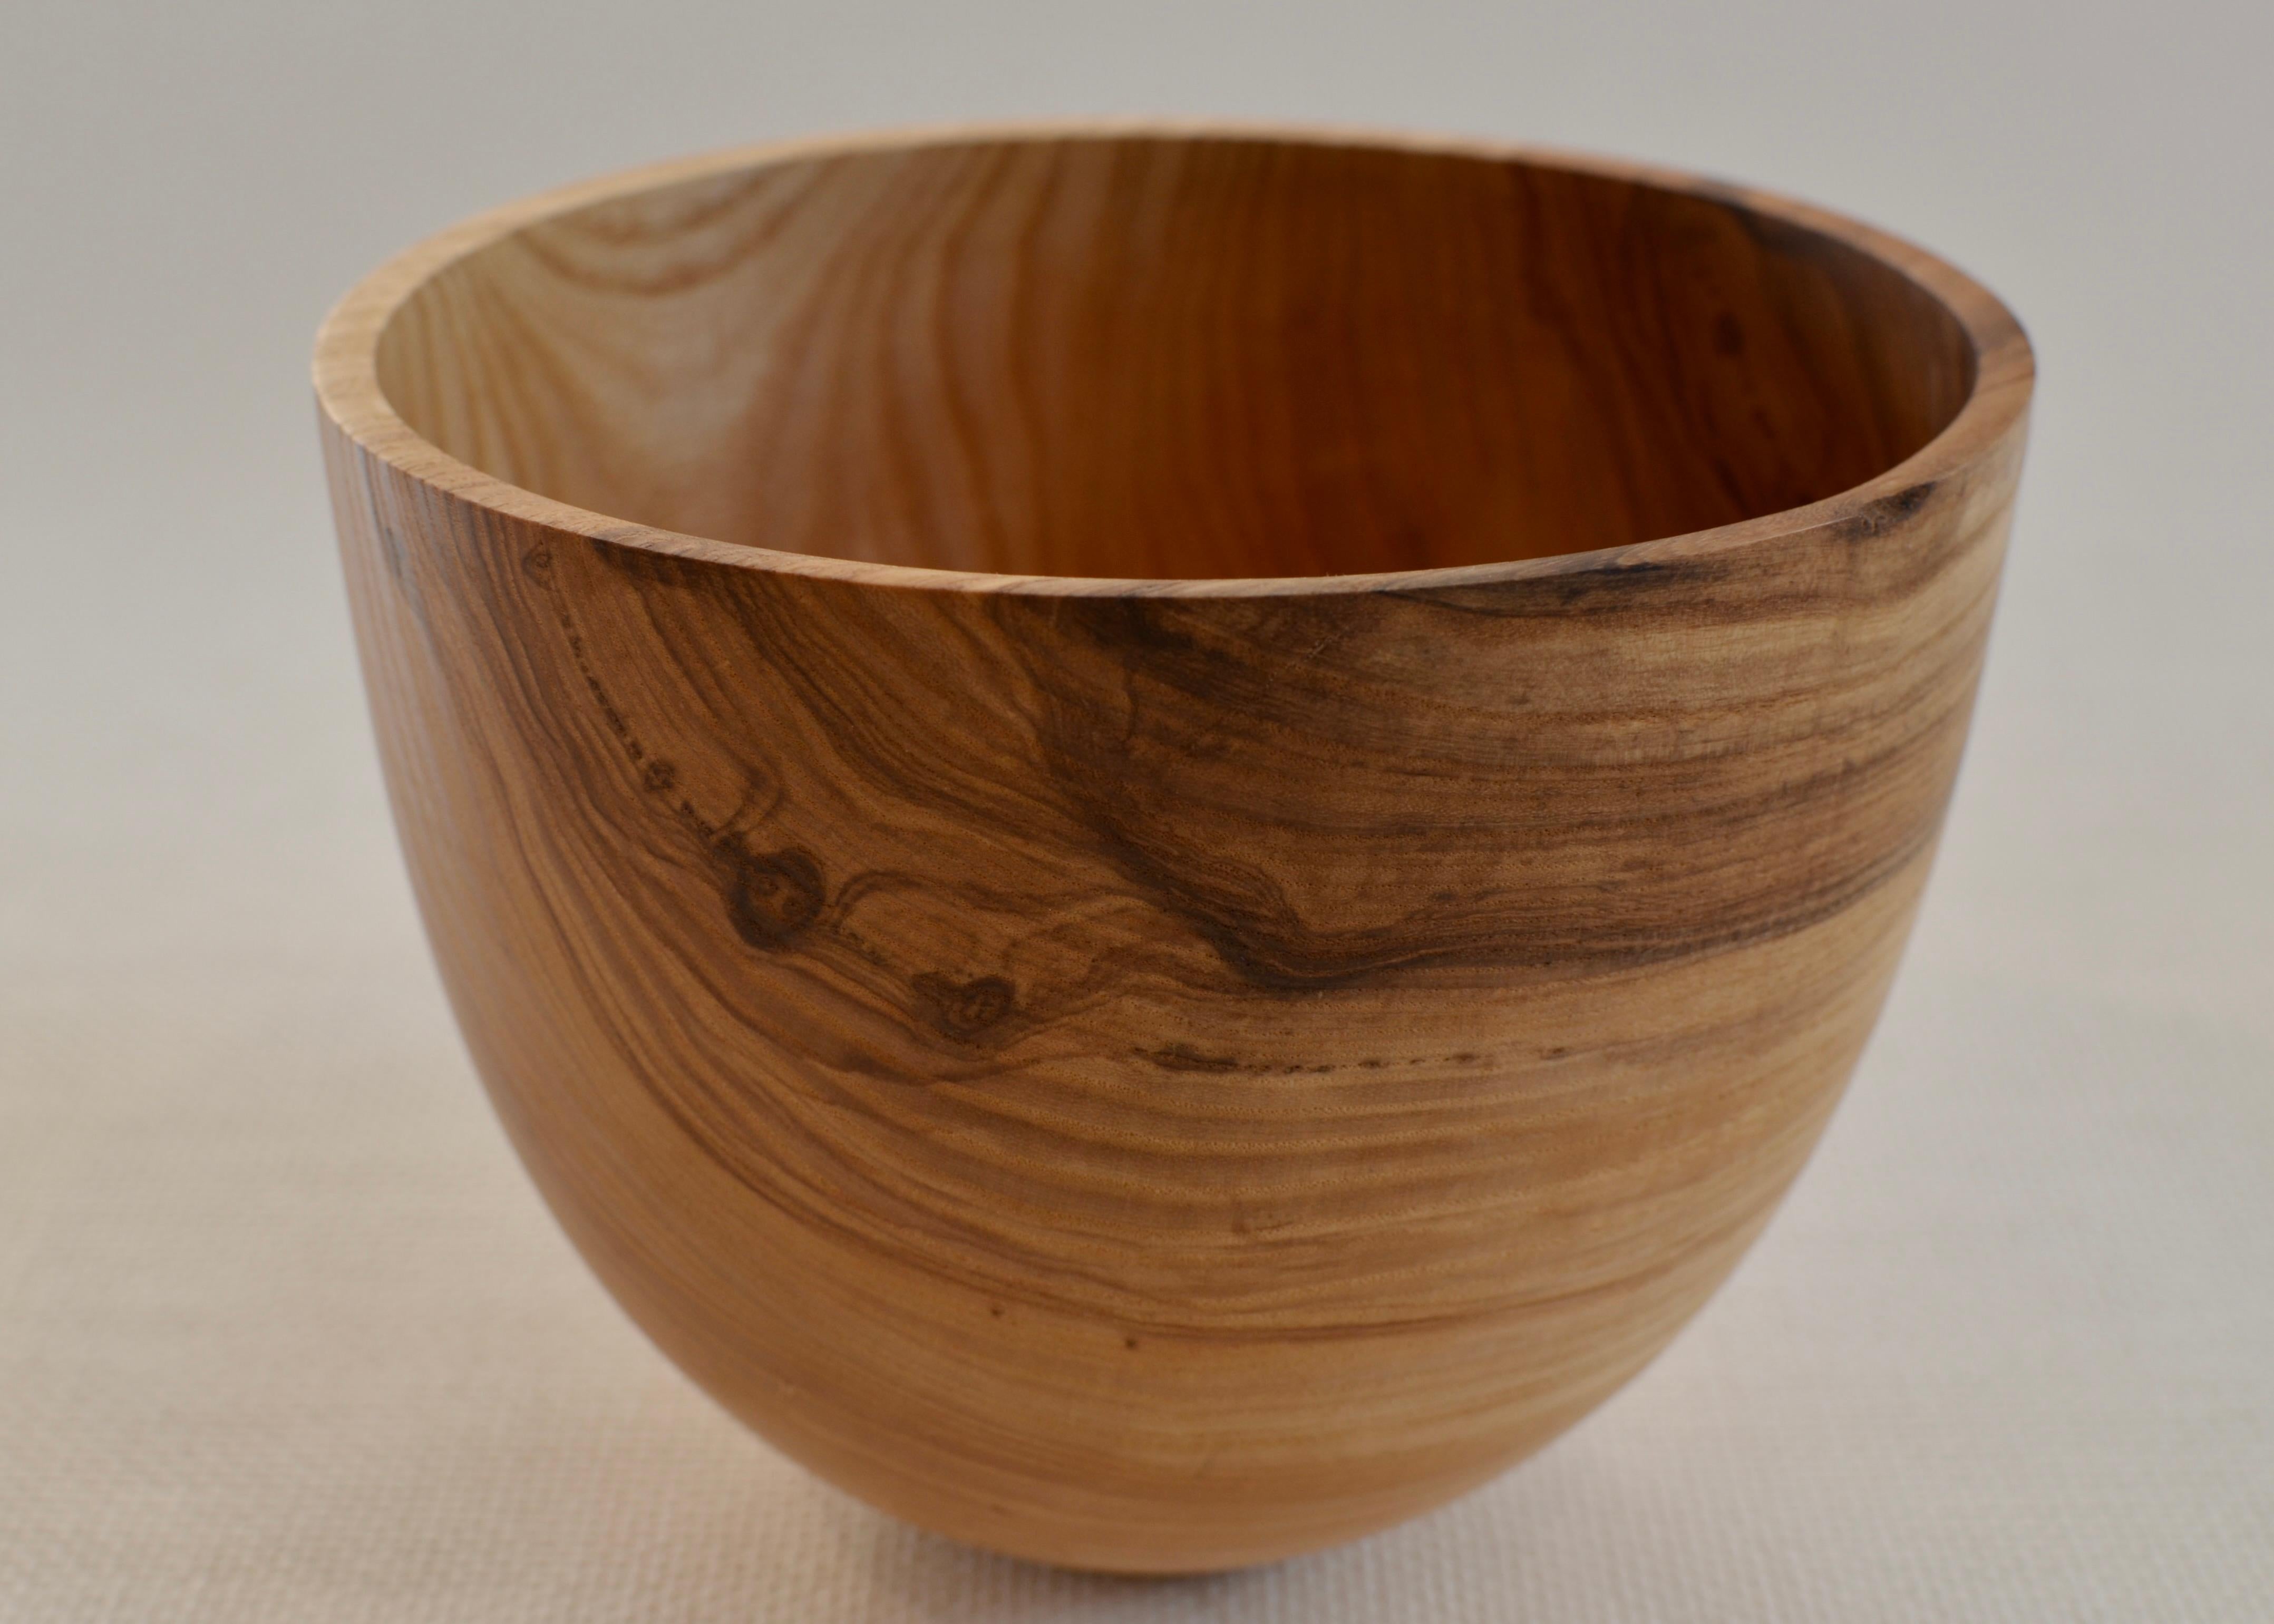 Hand-carved, 100-year-old Ash wood bowl with natural grain. Created using wood only from fallen Ash trees. One of a kind.